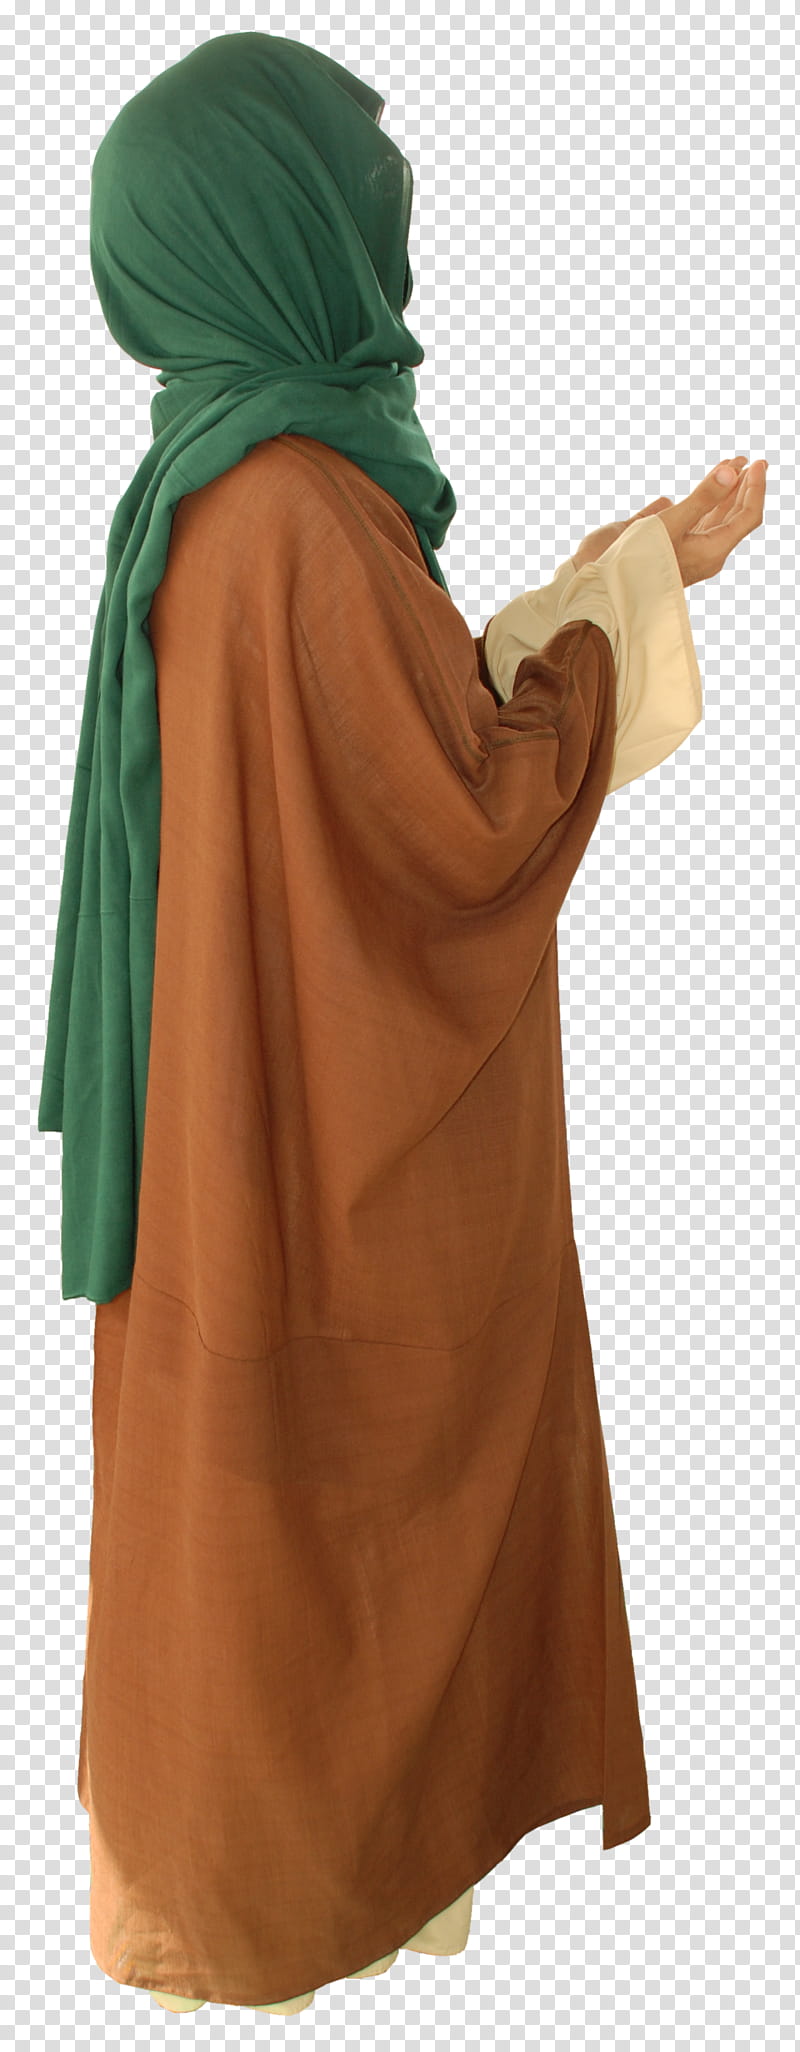 Arab old style clothes , woman wearing brown abaya and blue hijab headdress transparent background PNG clipart